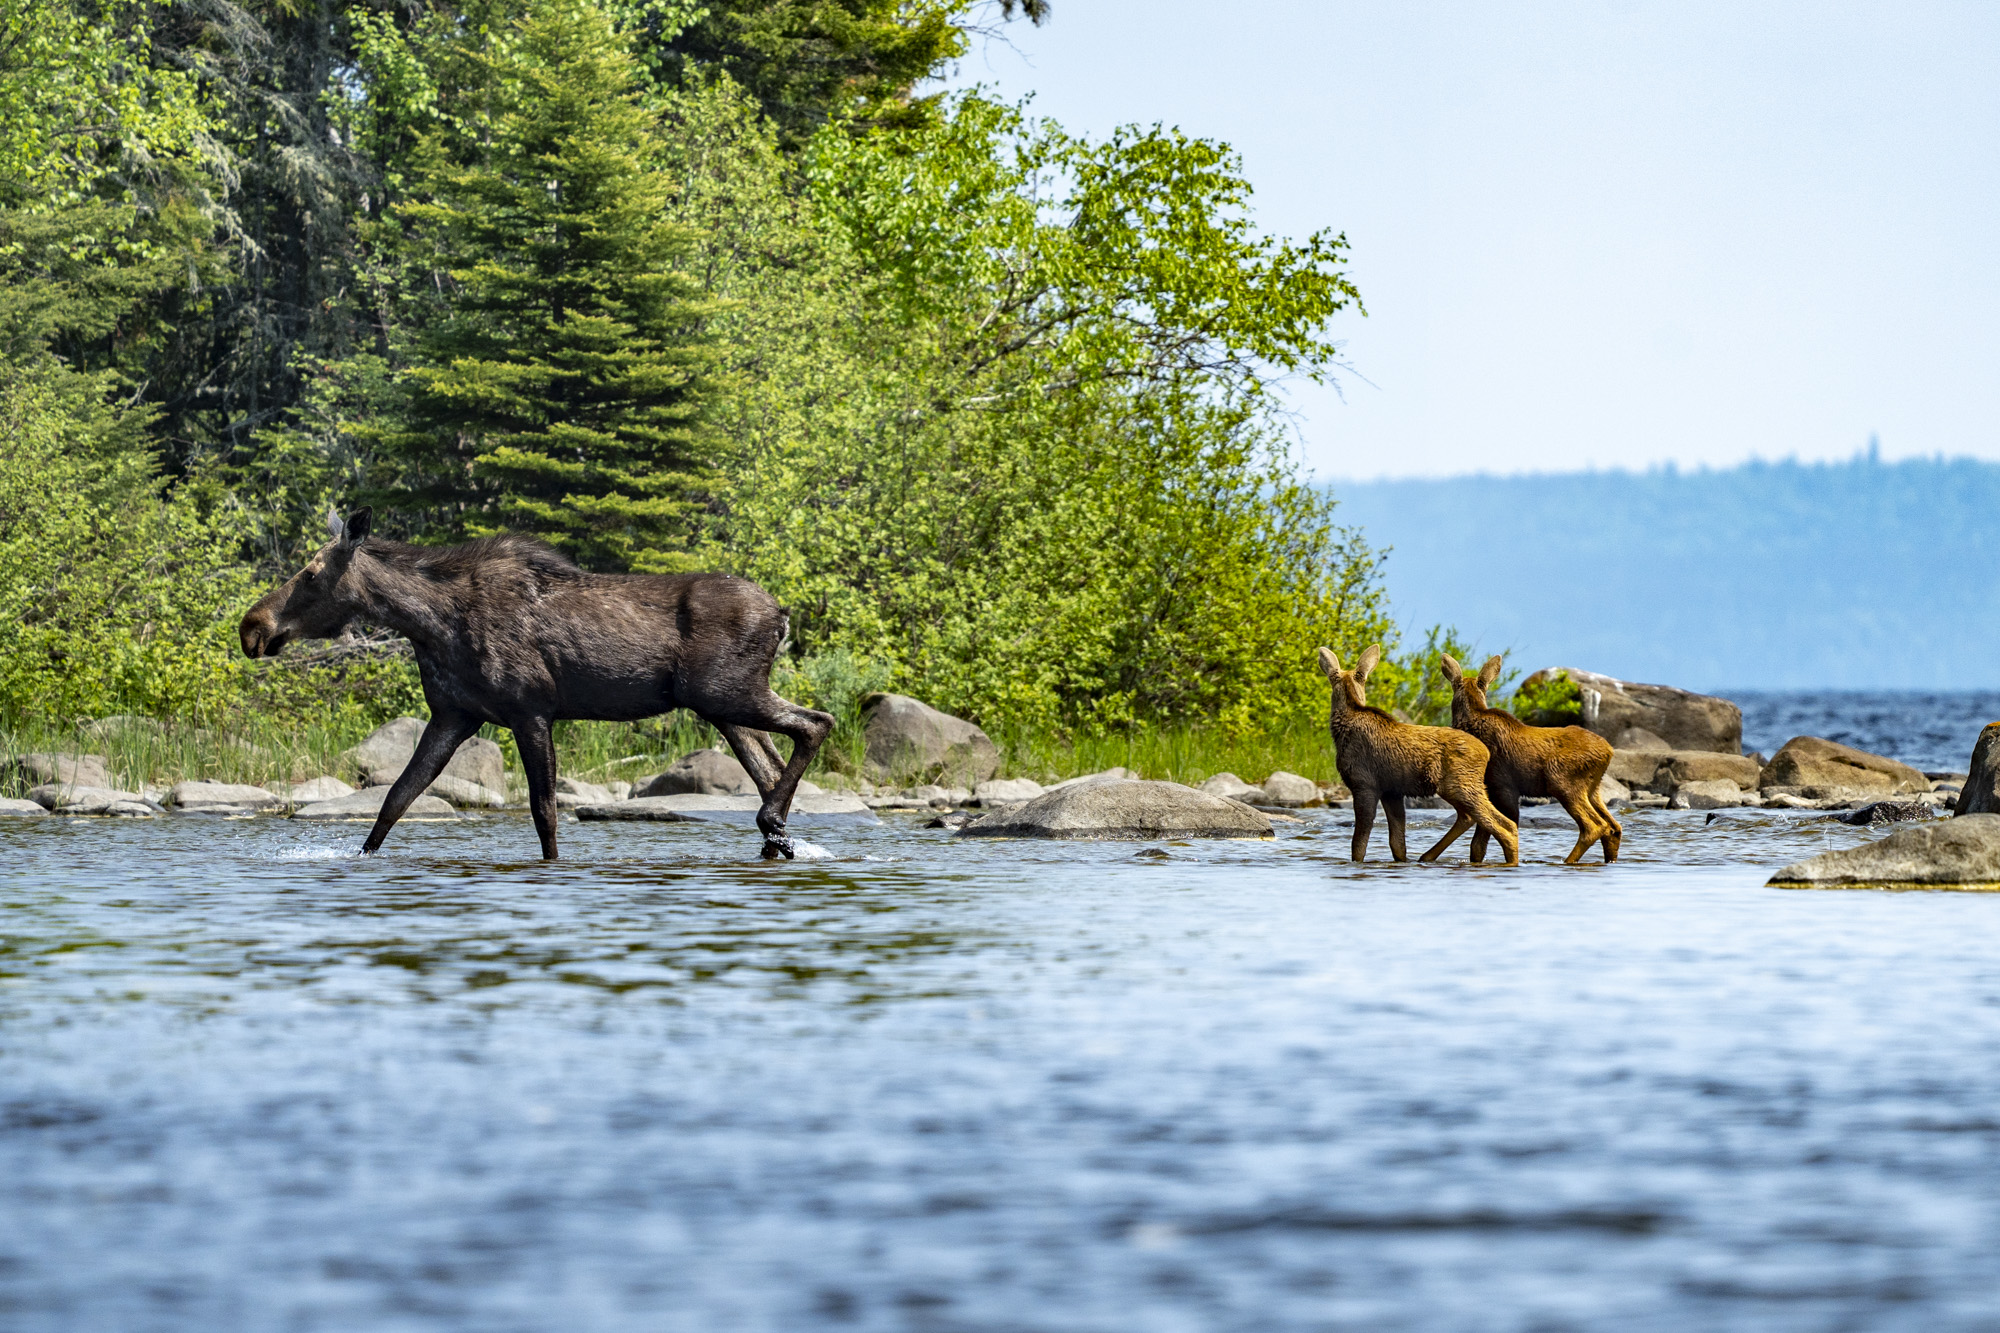 a moose with two calves walking in shallow water